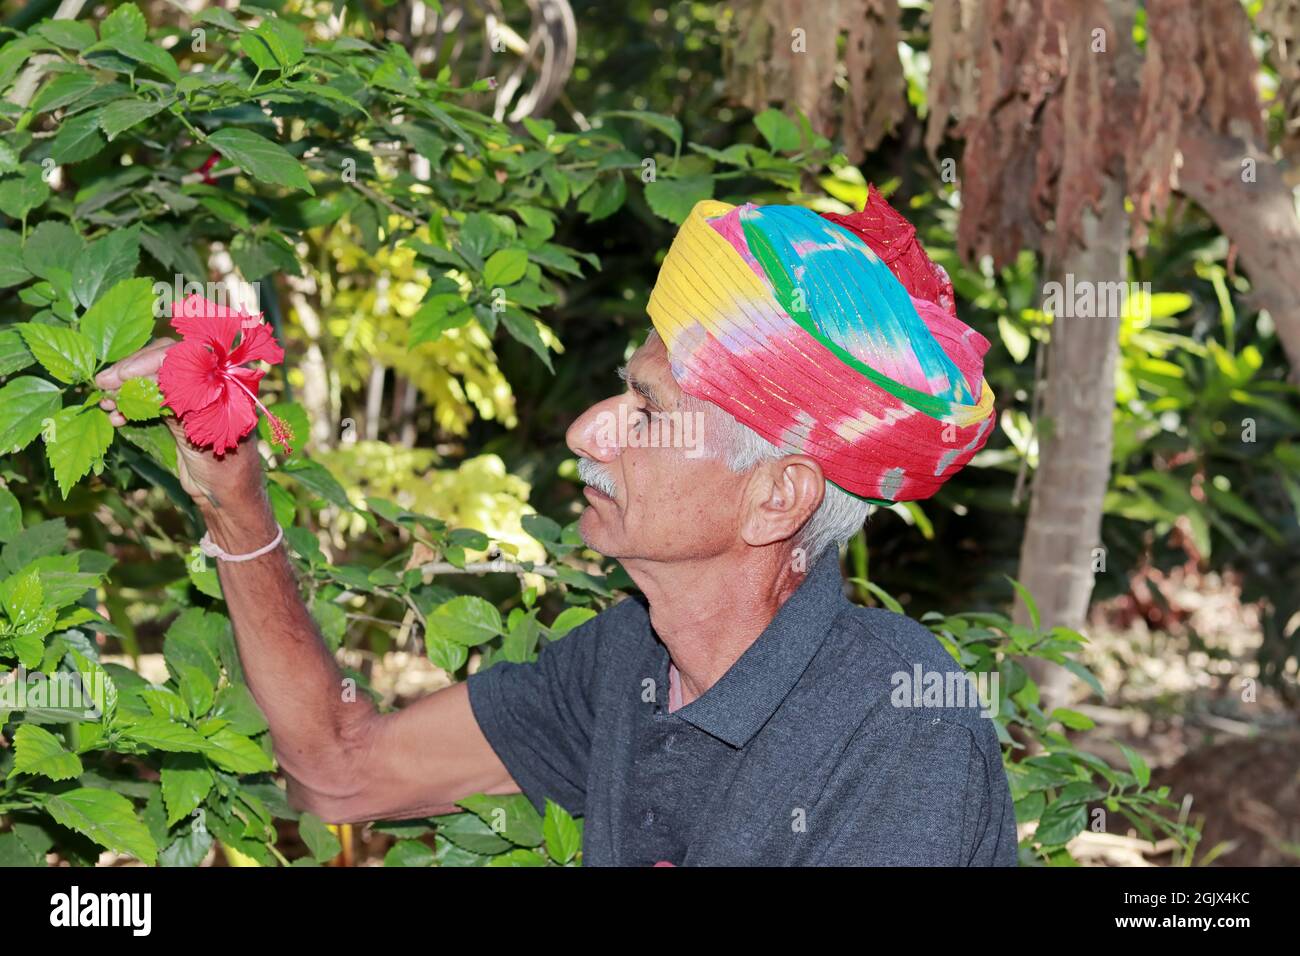 Close-up profile view of An Indian elderly farmer delighted to see a red hibiscus flower blooming in the garden, Colorful turban tied on the head acco Stock Photo